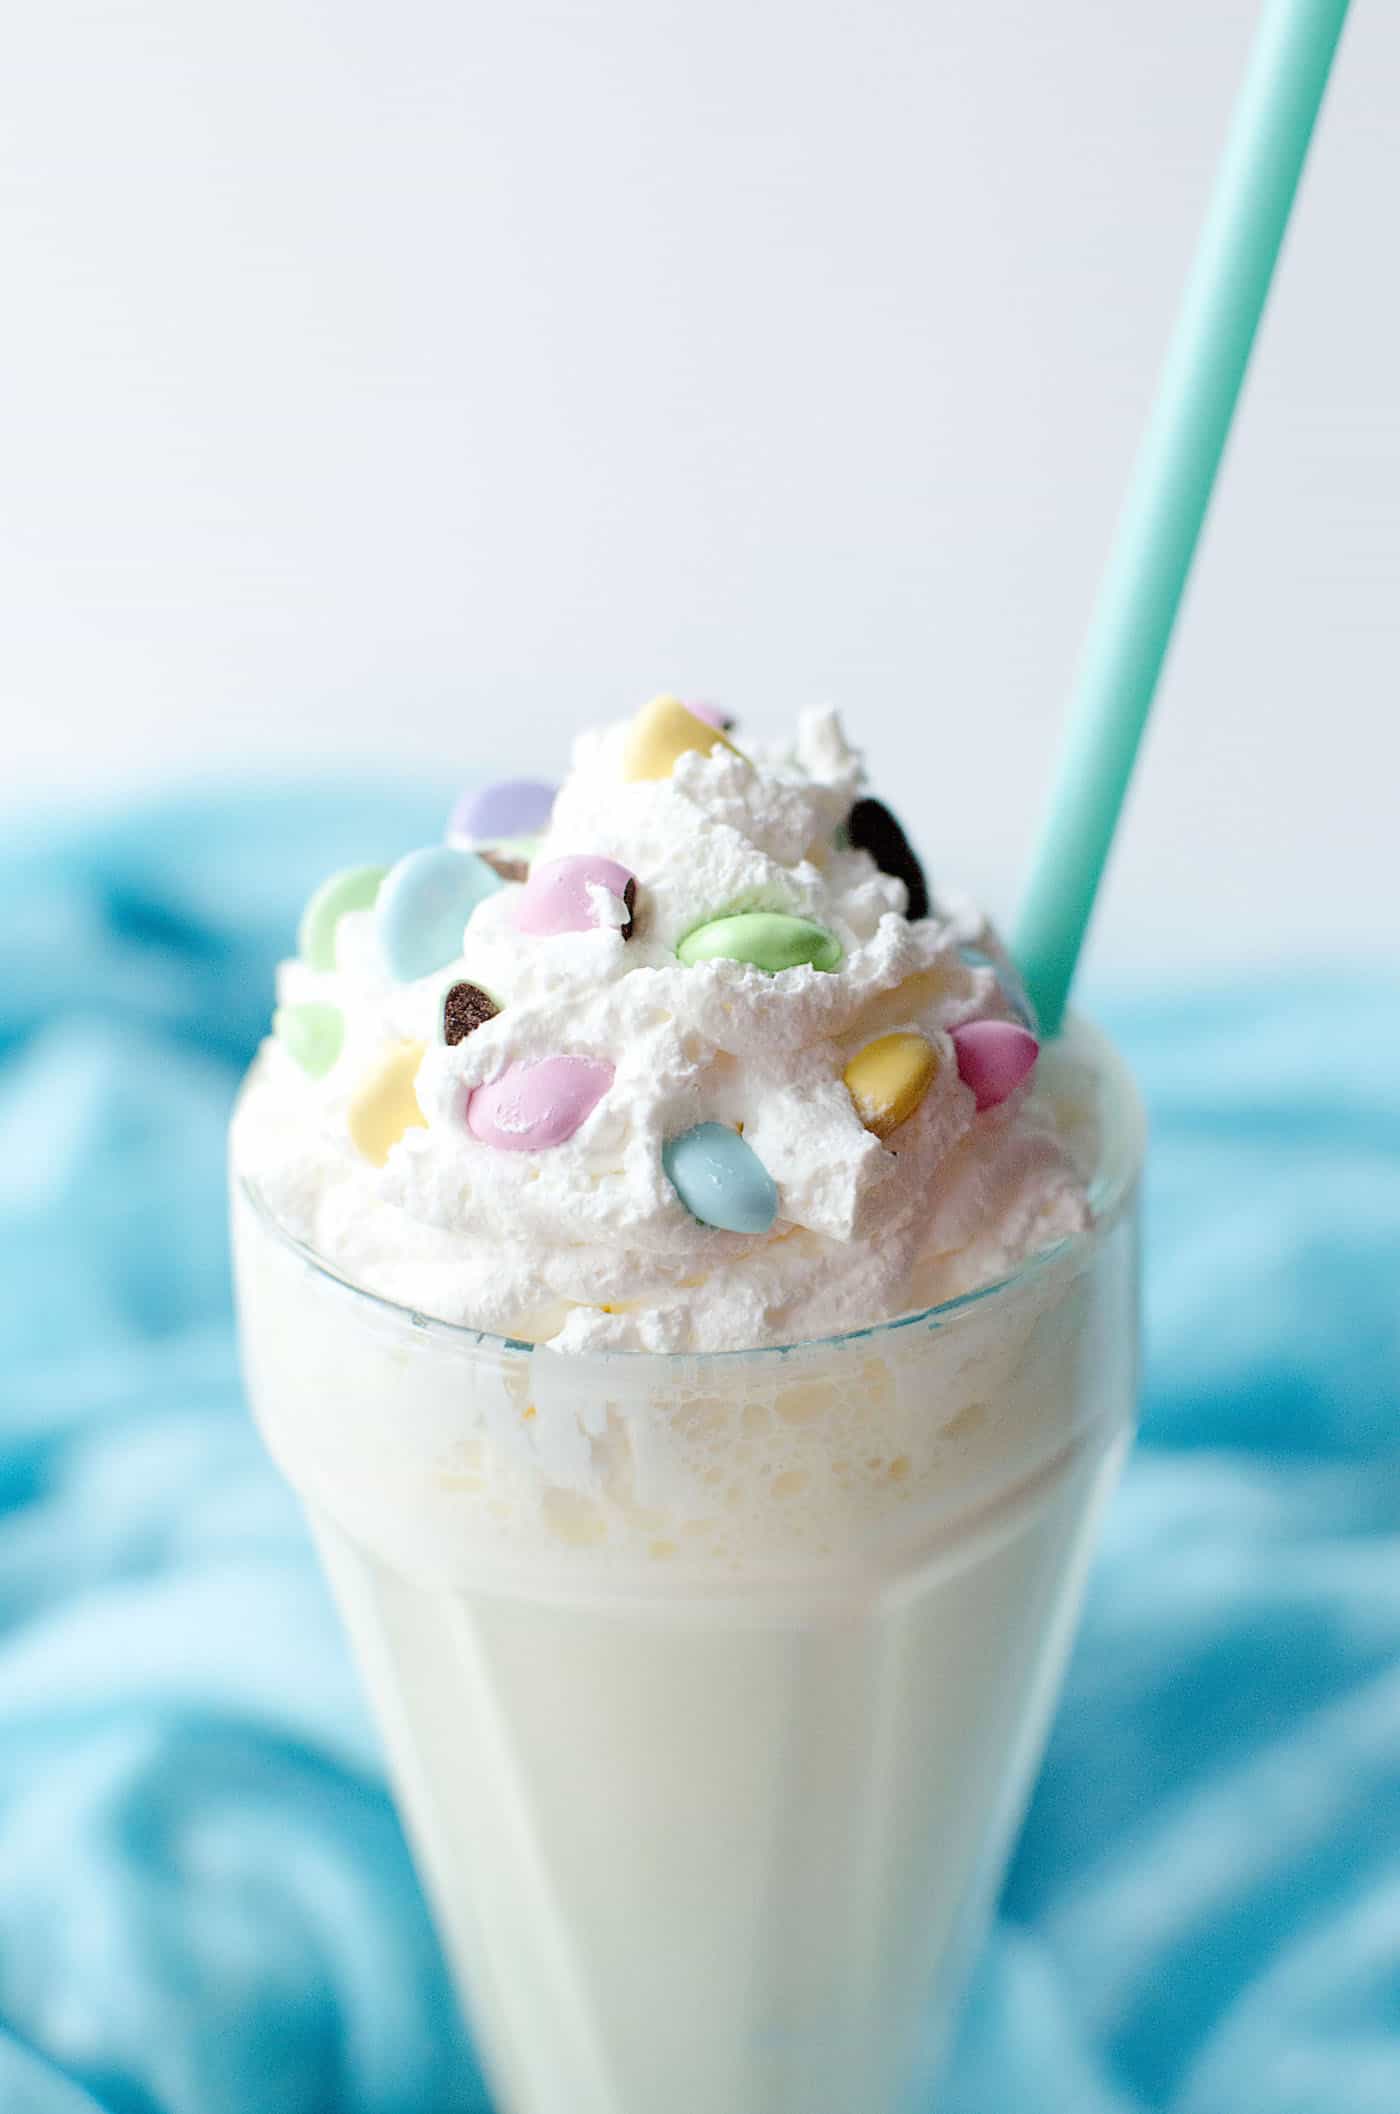 Celebrate the holidays (or any time of year) with this delicious banana milkshake! Whipped cream, Peeps and M&Ms on top make it extra festive. 